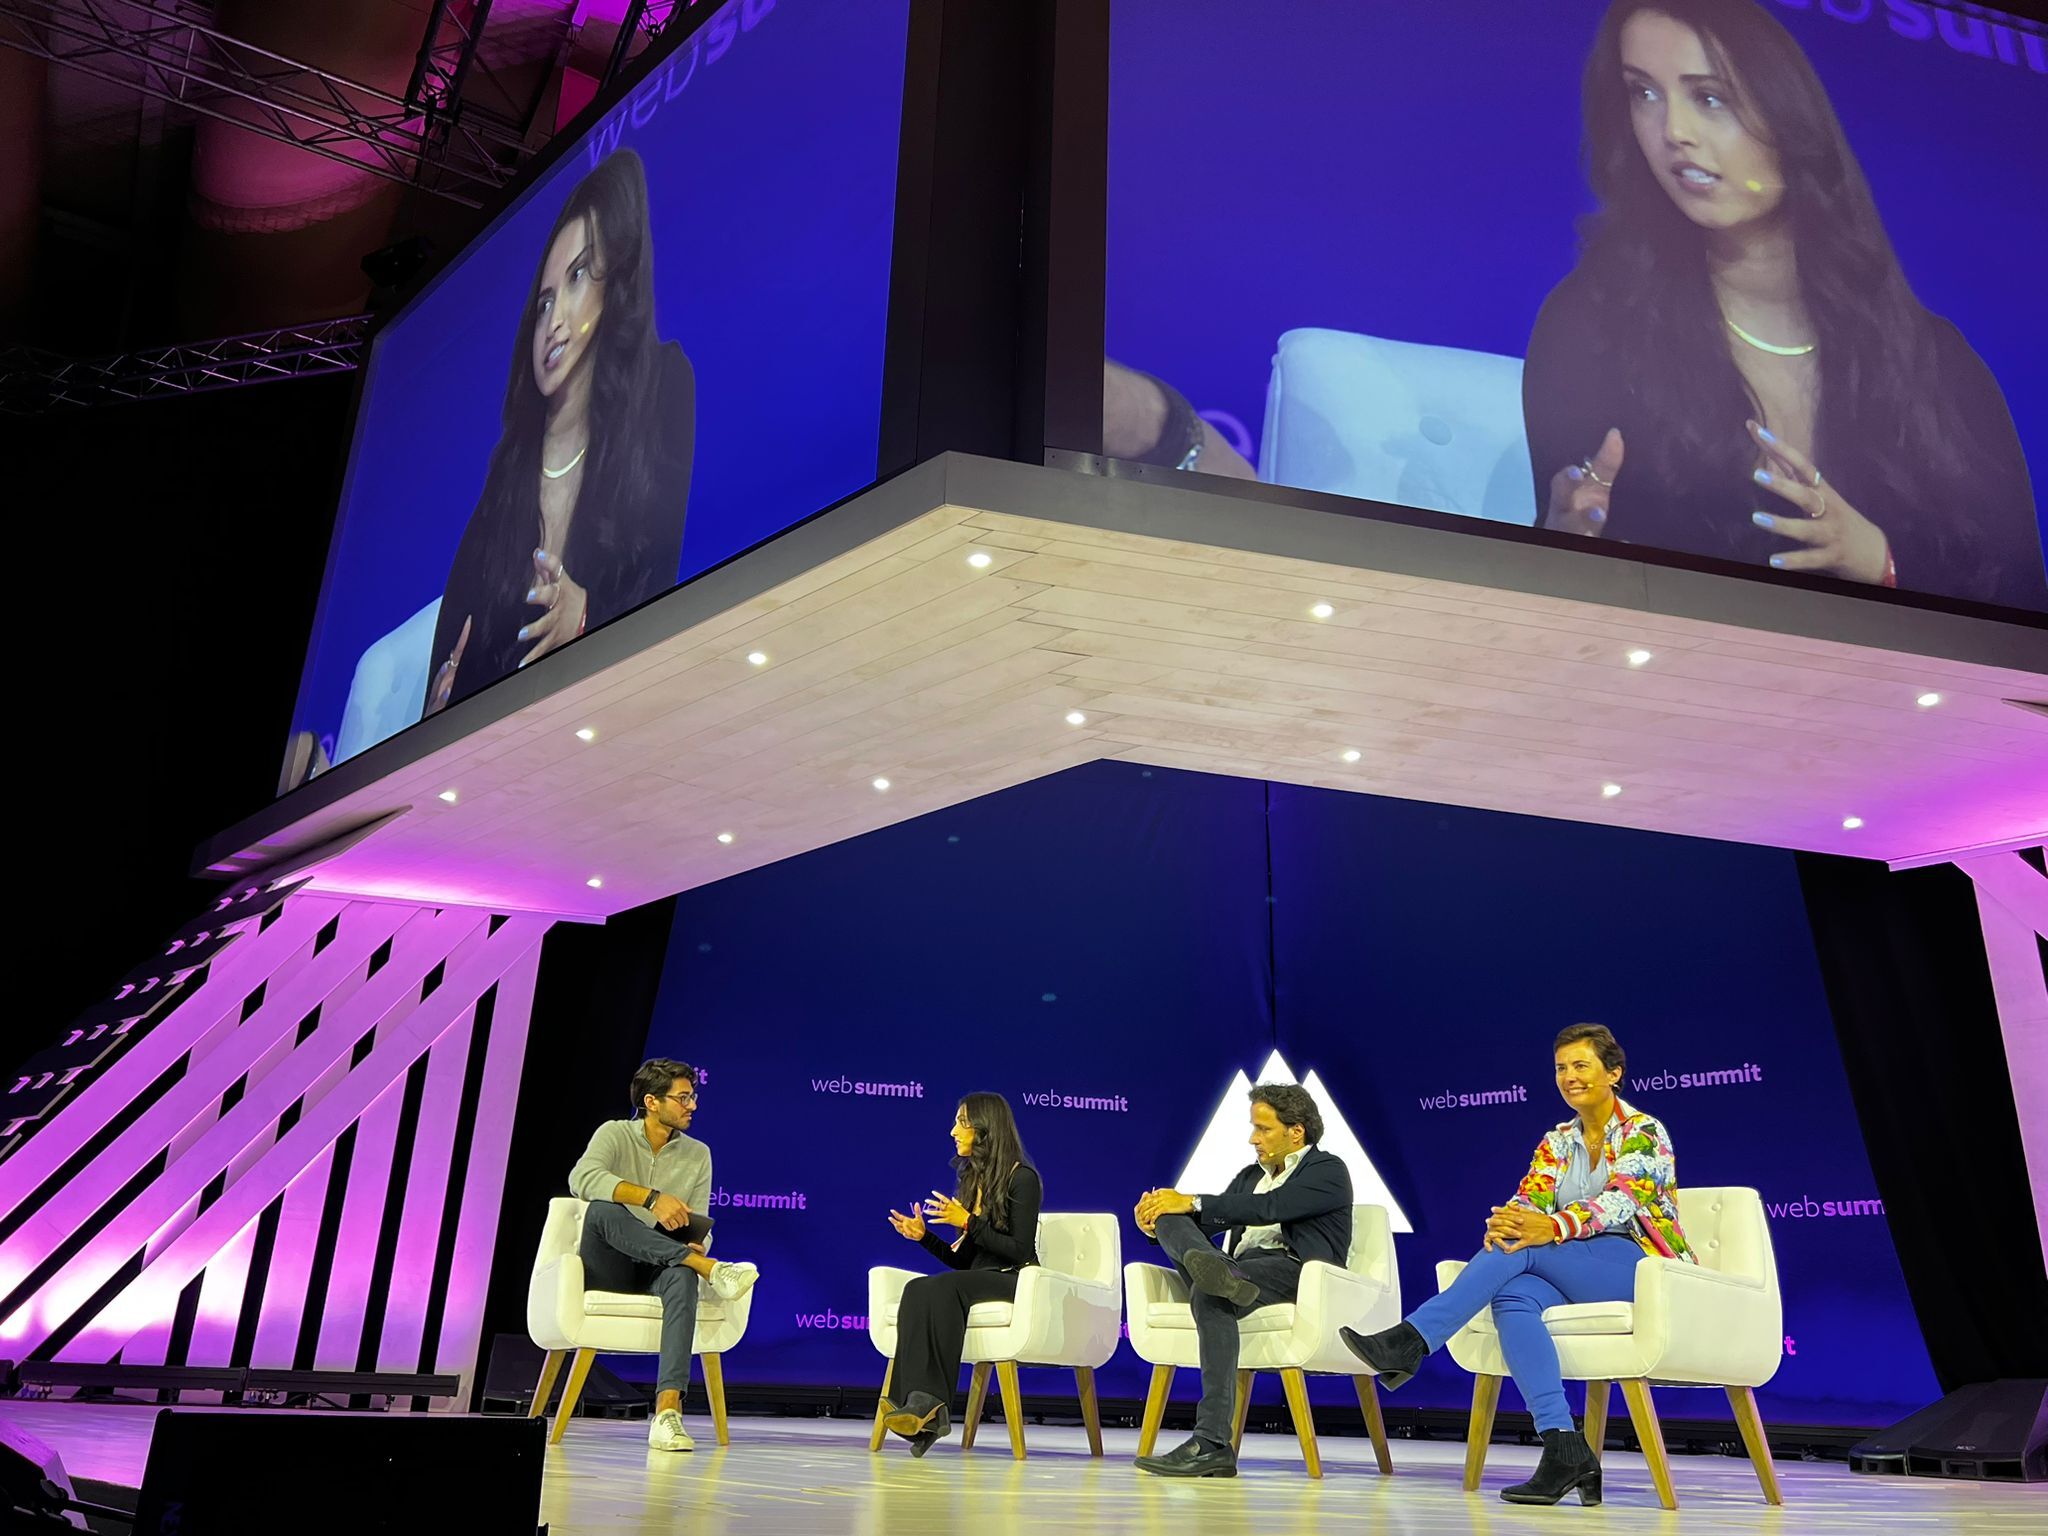 Four panelists sit on stage beneath a large screen that shows a female panelist speaking.